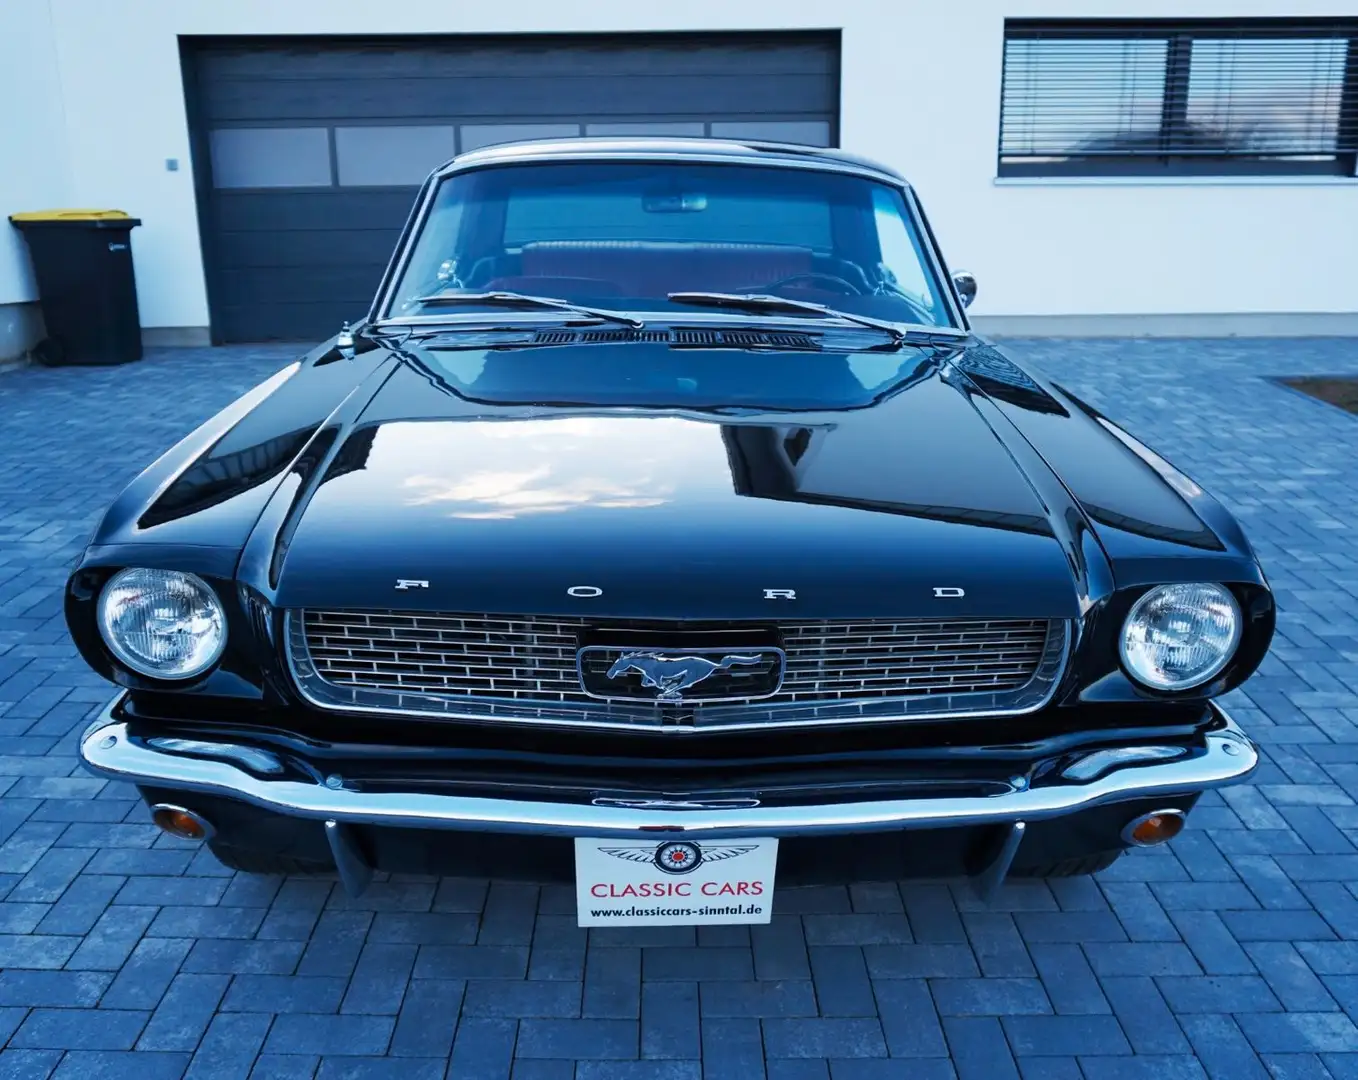 Ford Mustang "GT STYLE" mit Pony Deluxe Interior - V8 Czarny - 2